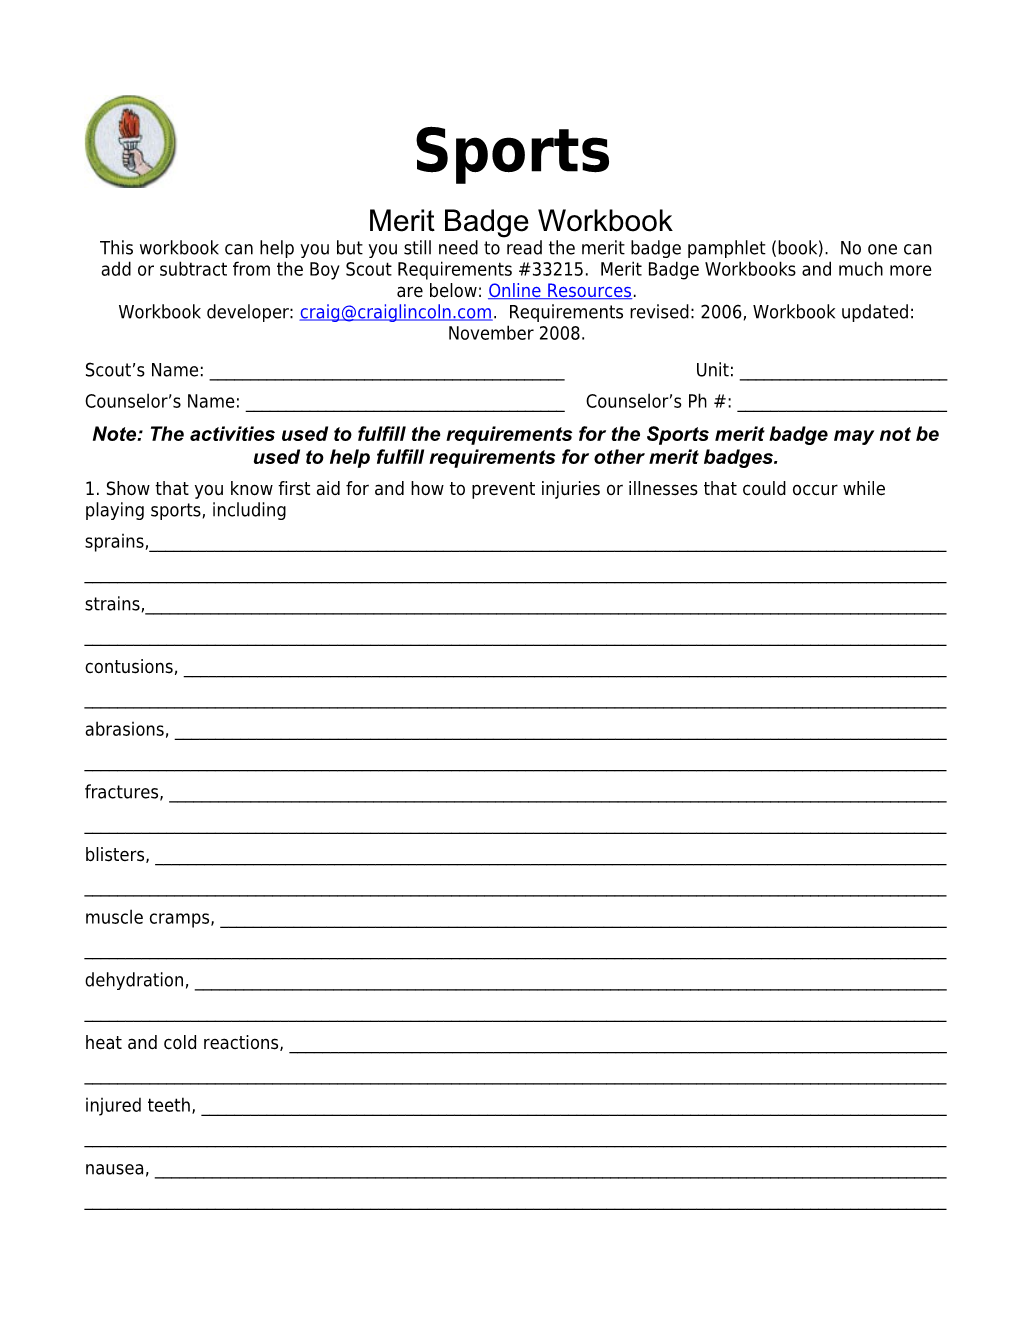 Sports P. 7 Merit Badge Workbook Scout's Name: ______ s1